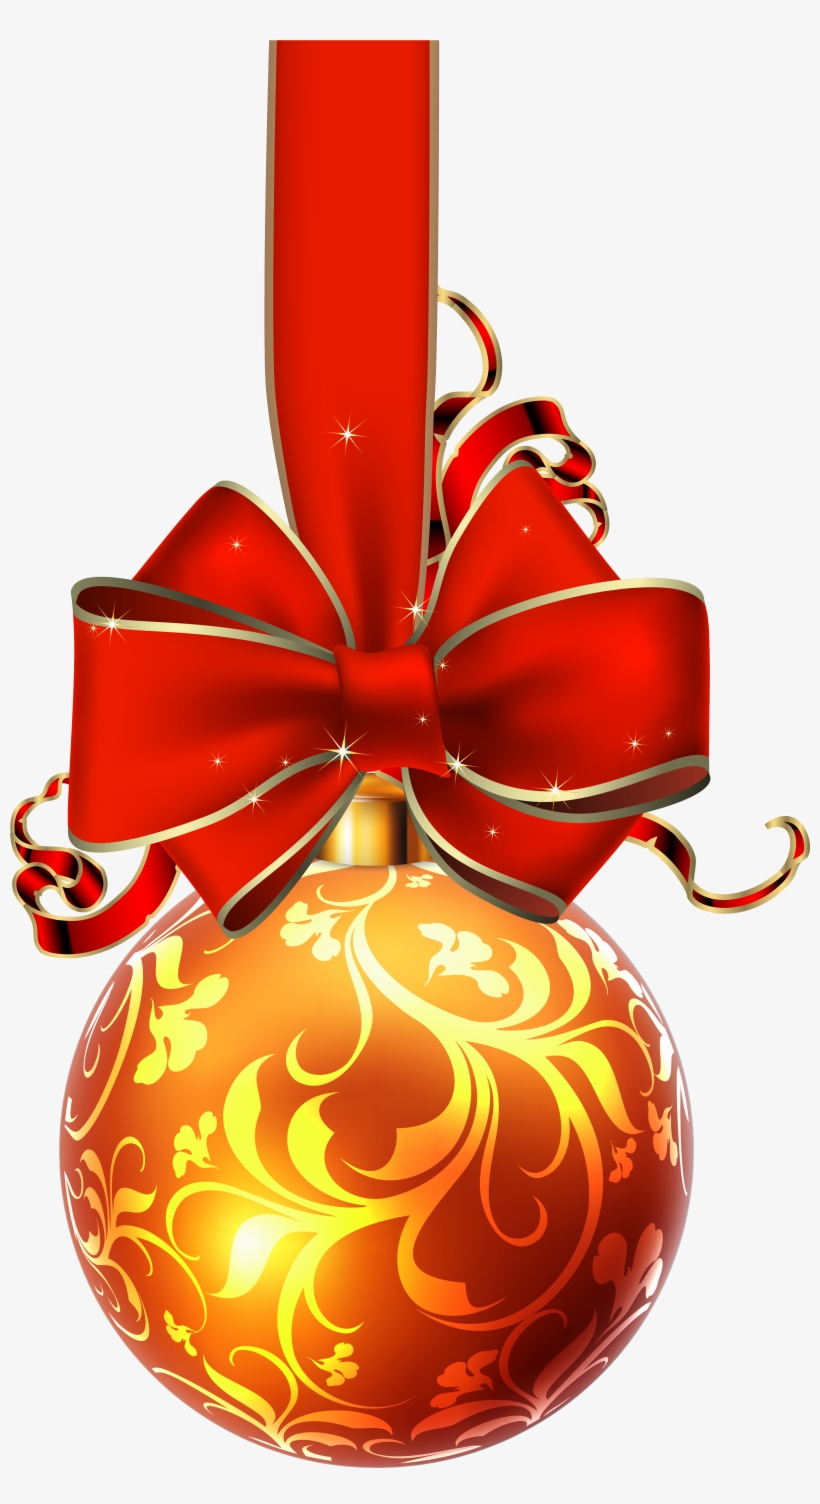 Christmas Ball With Red Bow Png Clipart Image - Christmas Ornament With Bow, transparent png #340080